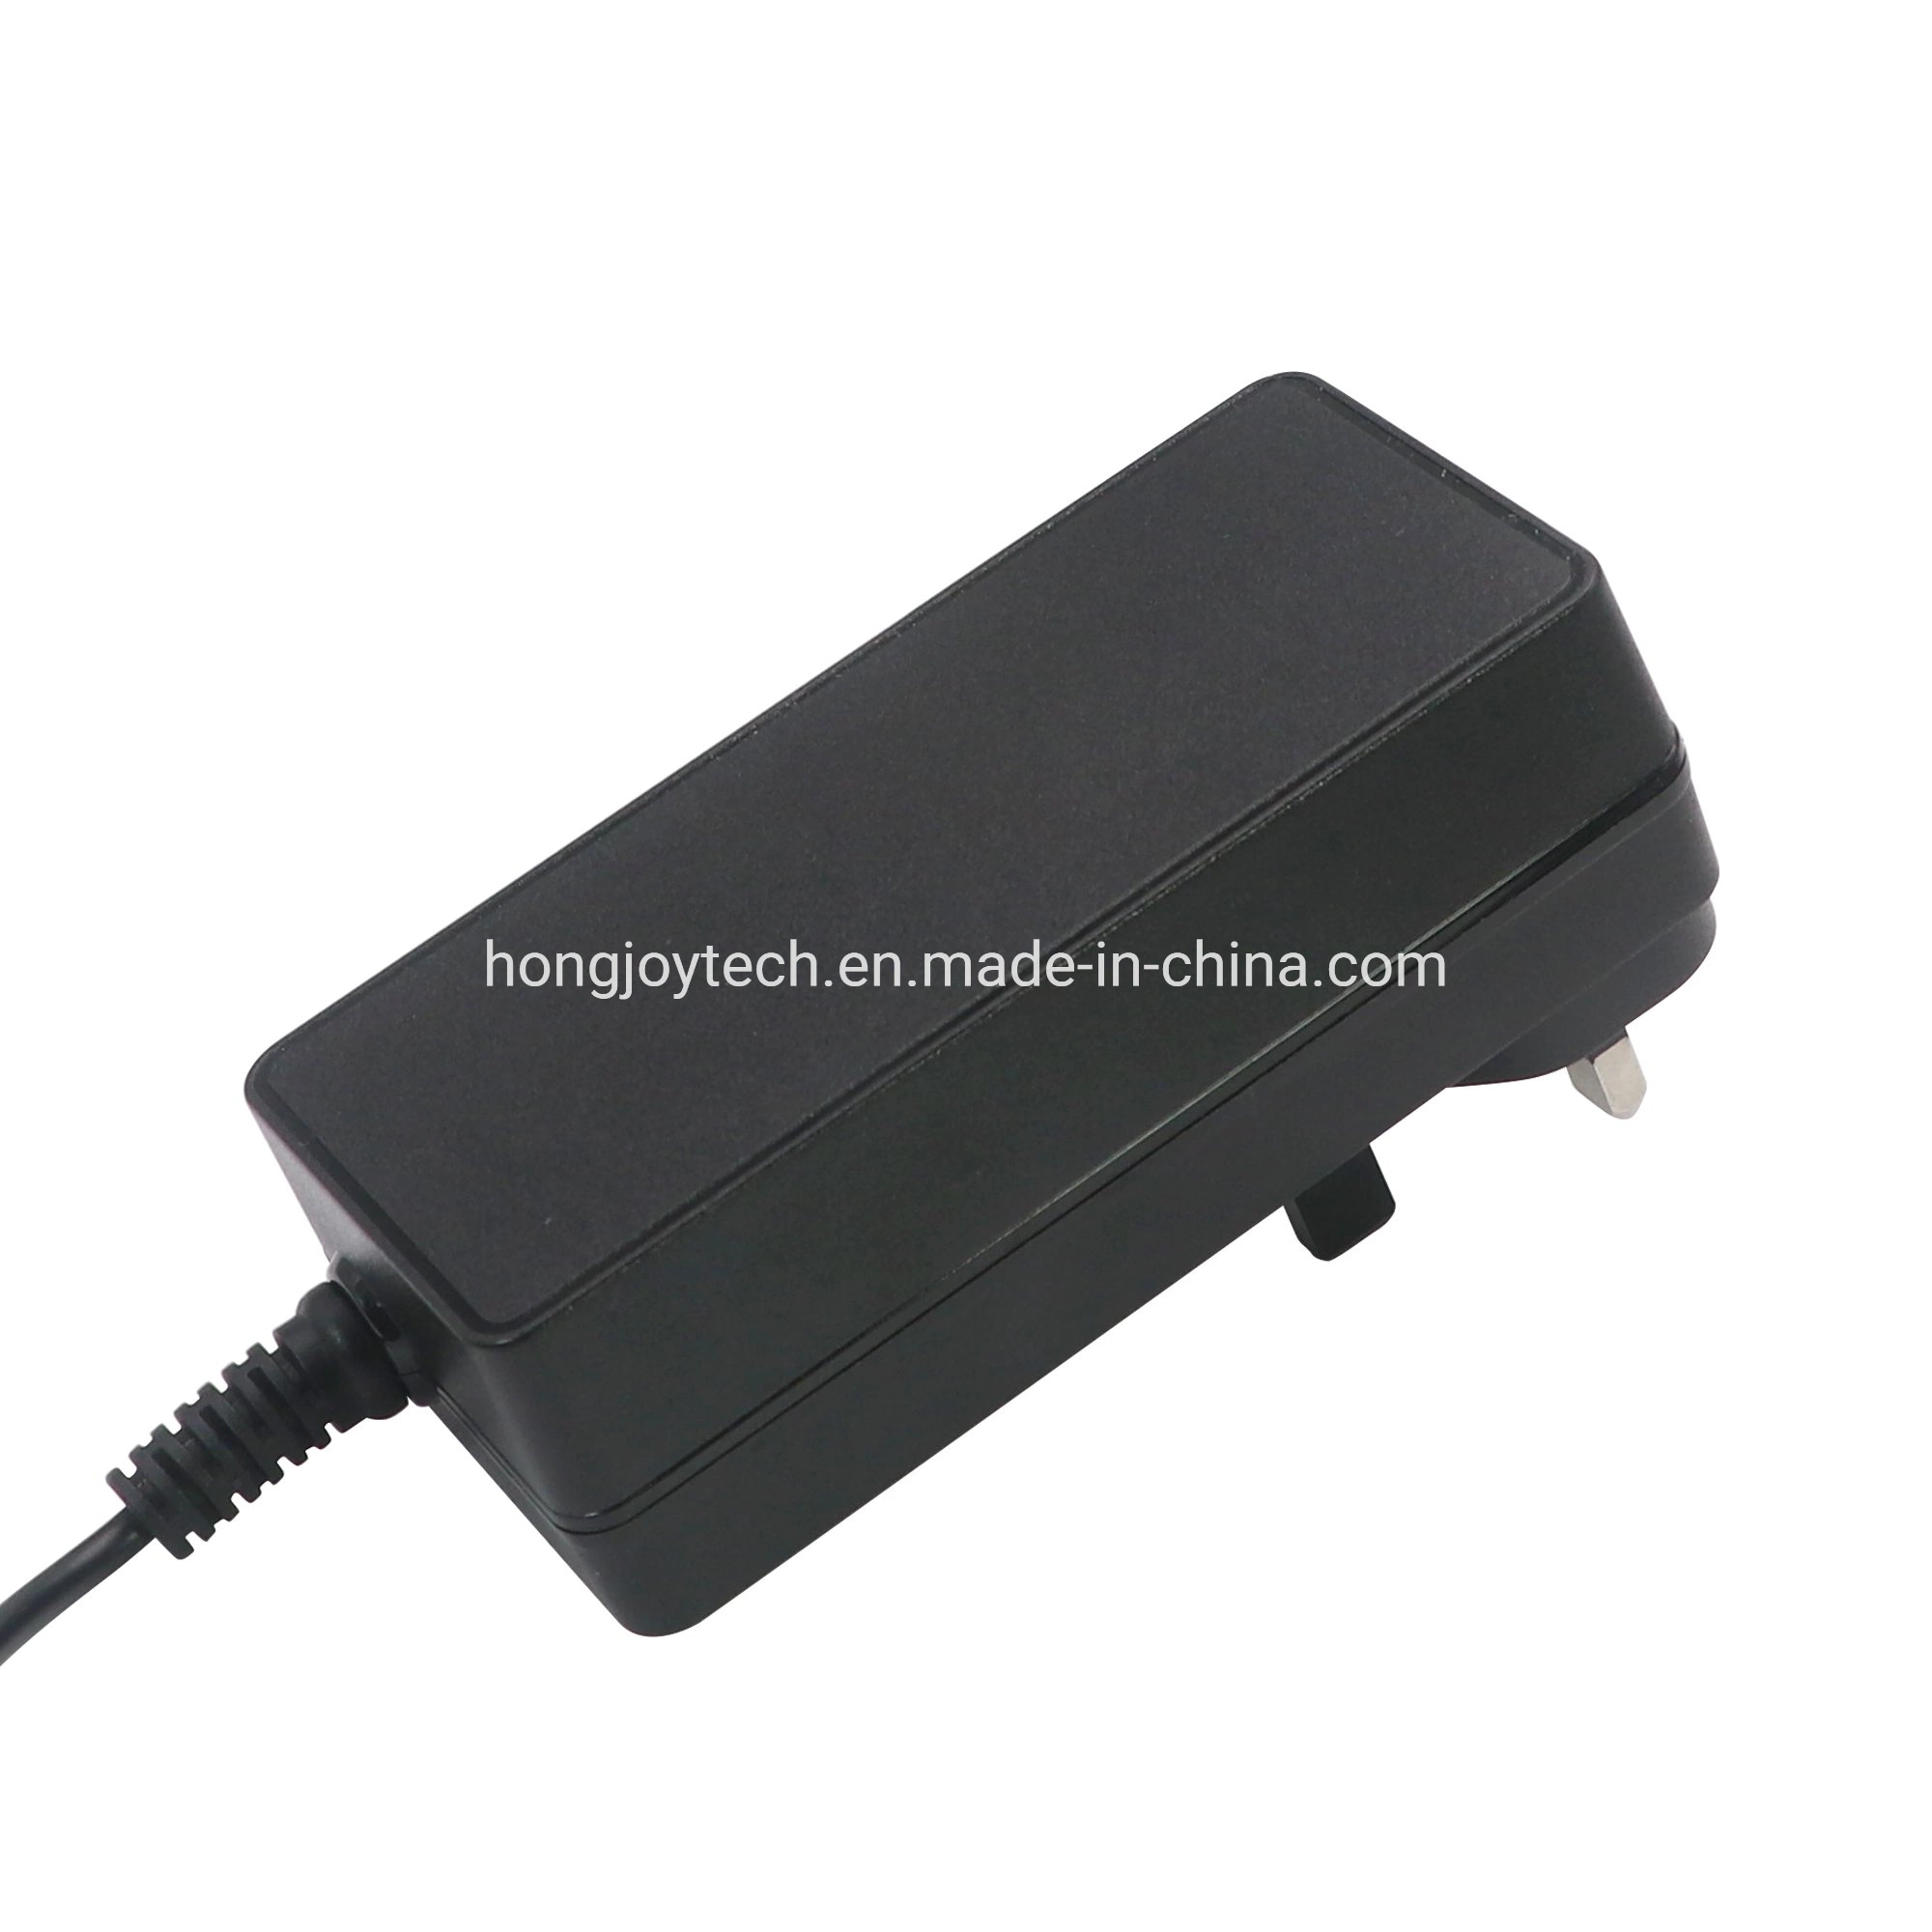 12V 12.6V 24V 25.2V 33.6V 36V 42V 48V 52V 60V 72V 0.5A 1A 1.5A 2A 2.5A 3A 4A 3.5A Lead Acid Battery Charger 18650 Battery Charger SLA Solar Charger for Robot